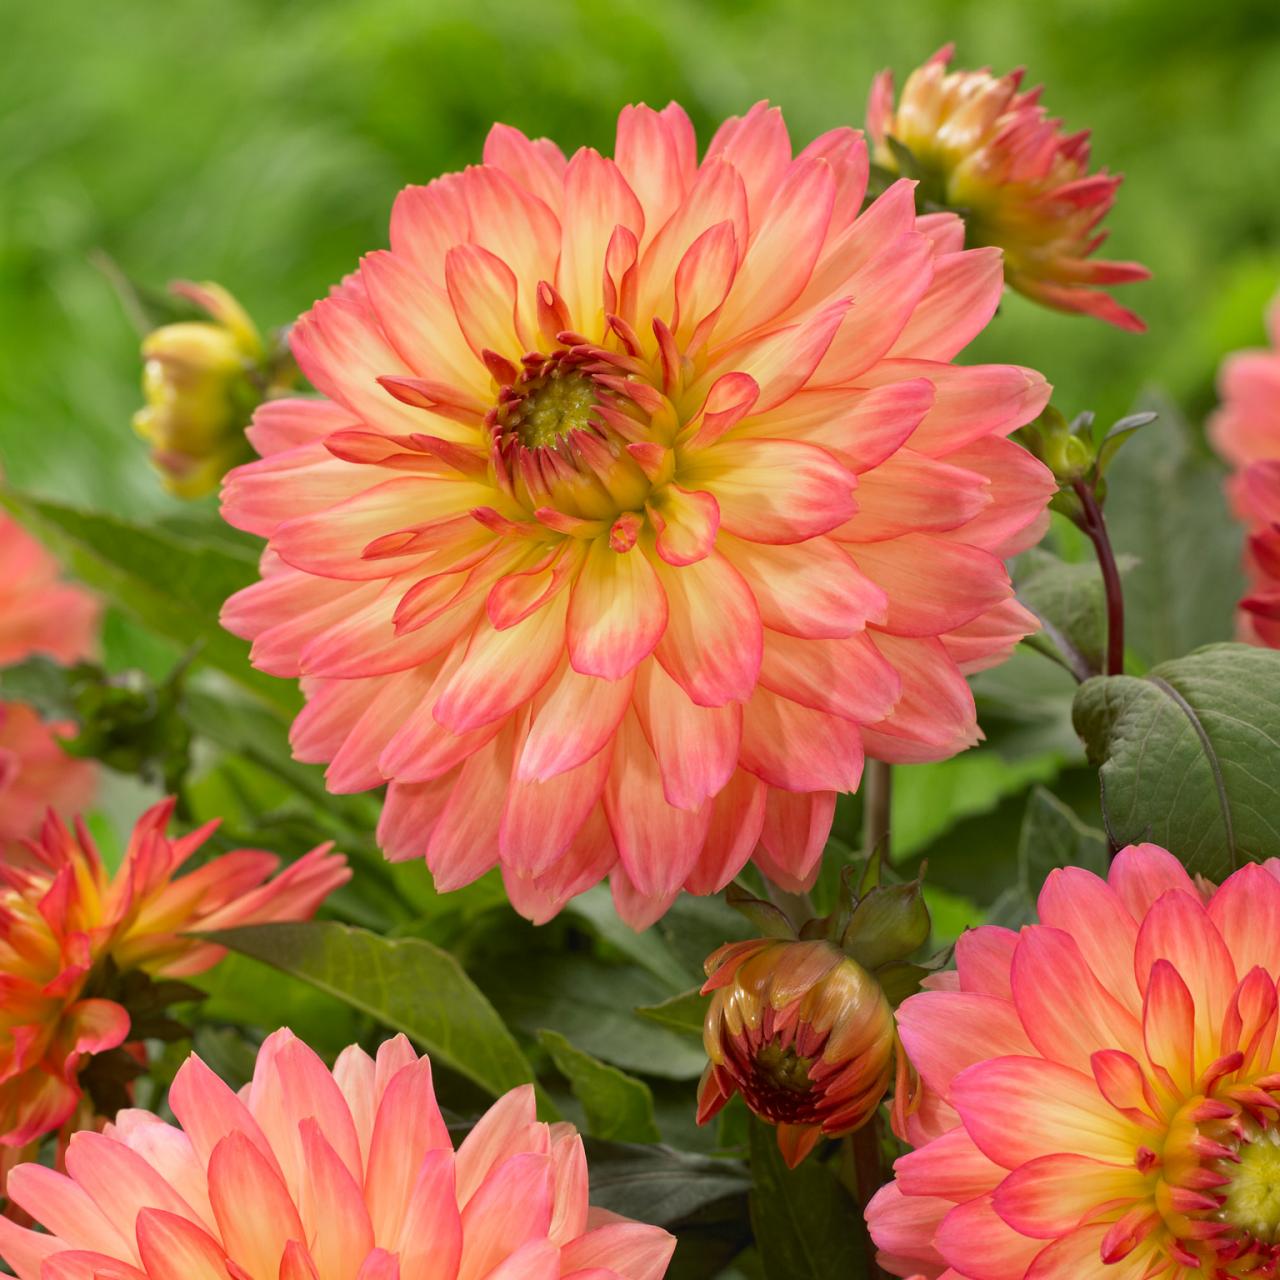 11 Tips For Growing Beautiful Dahlias in Pots or Containers